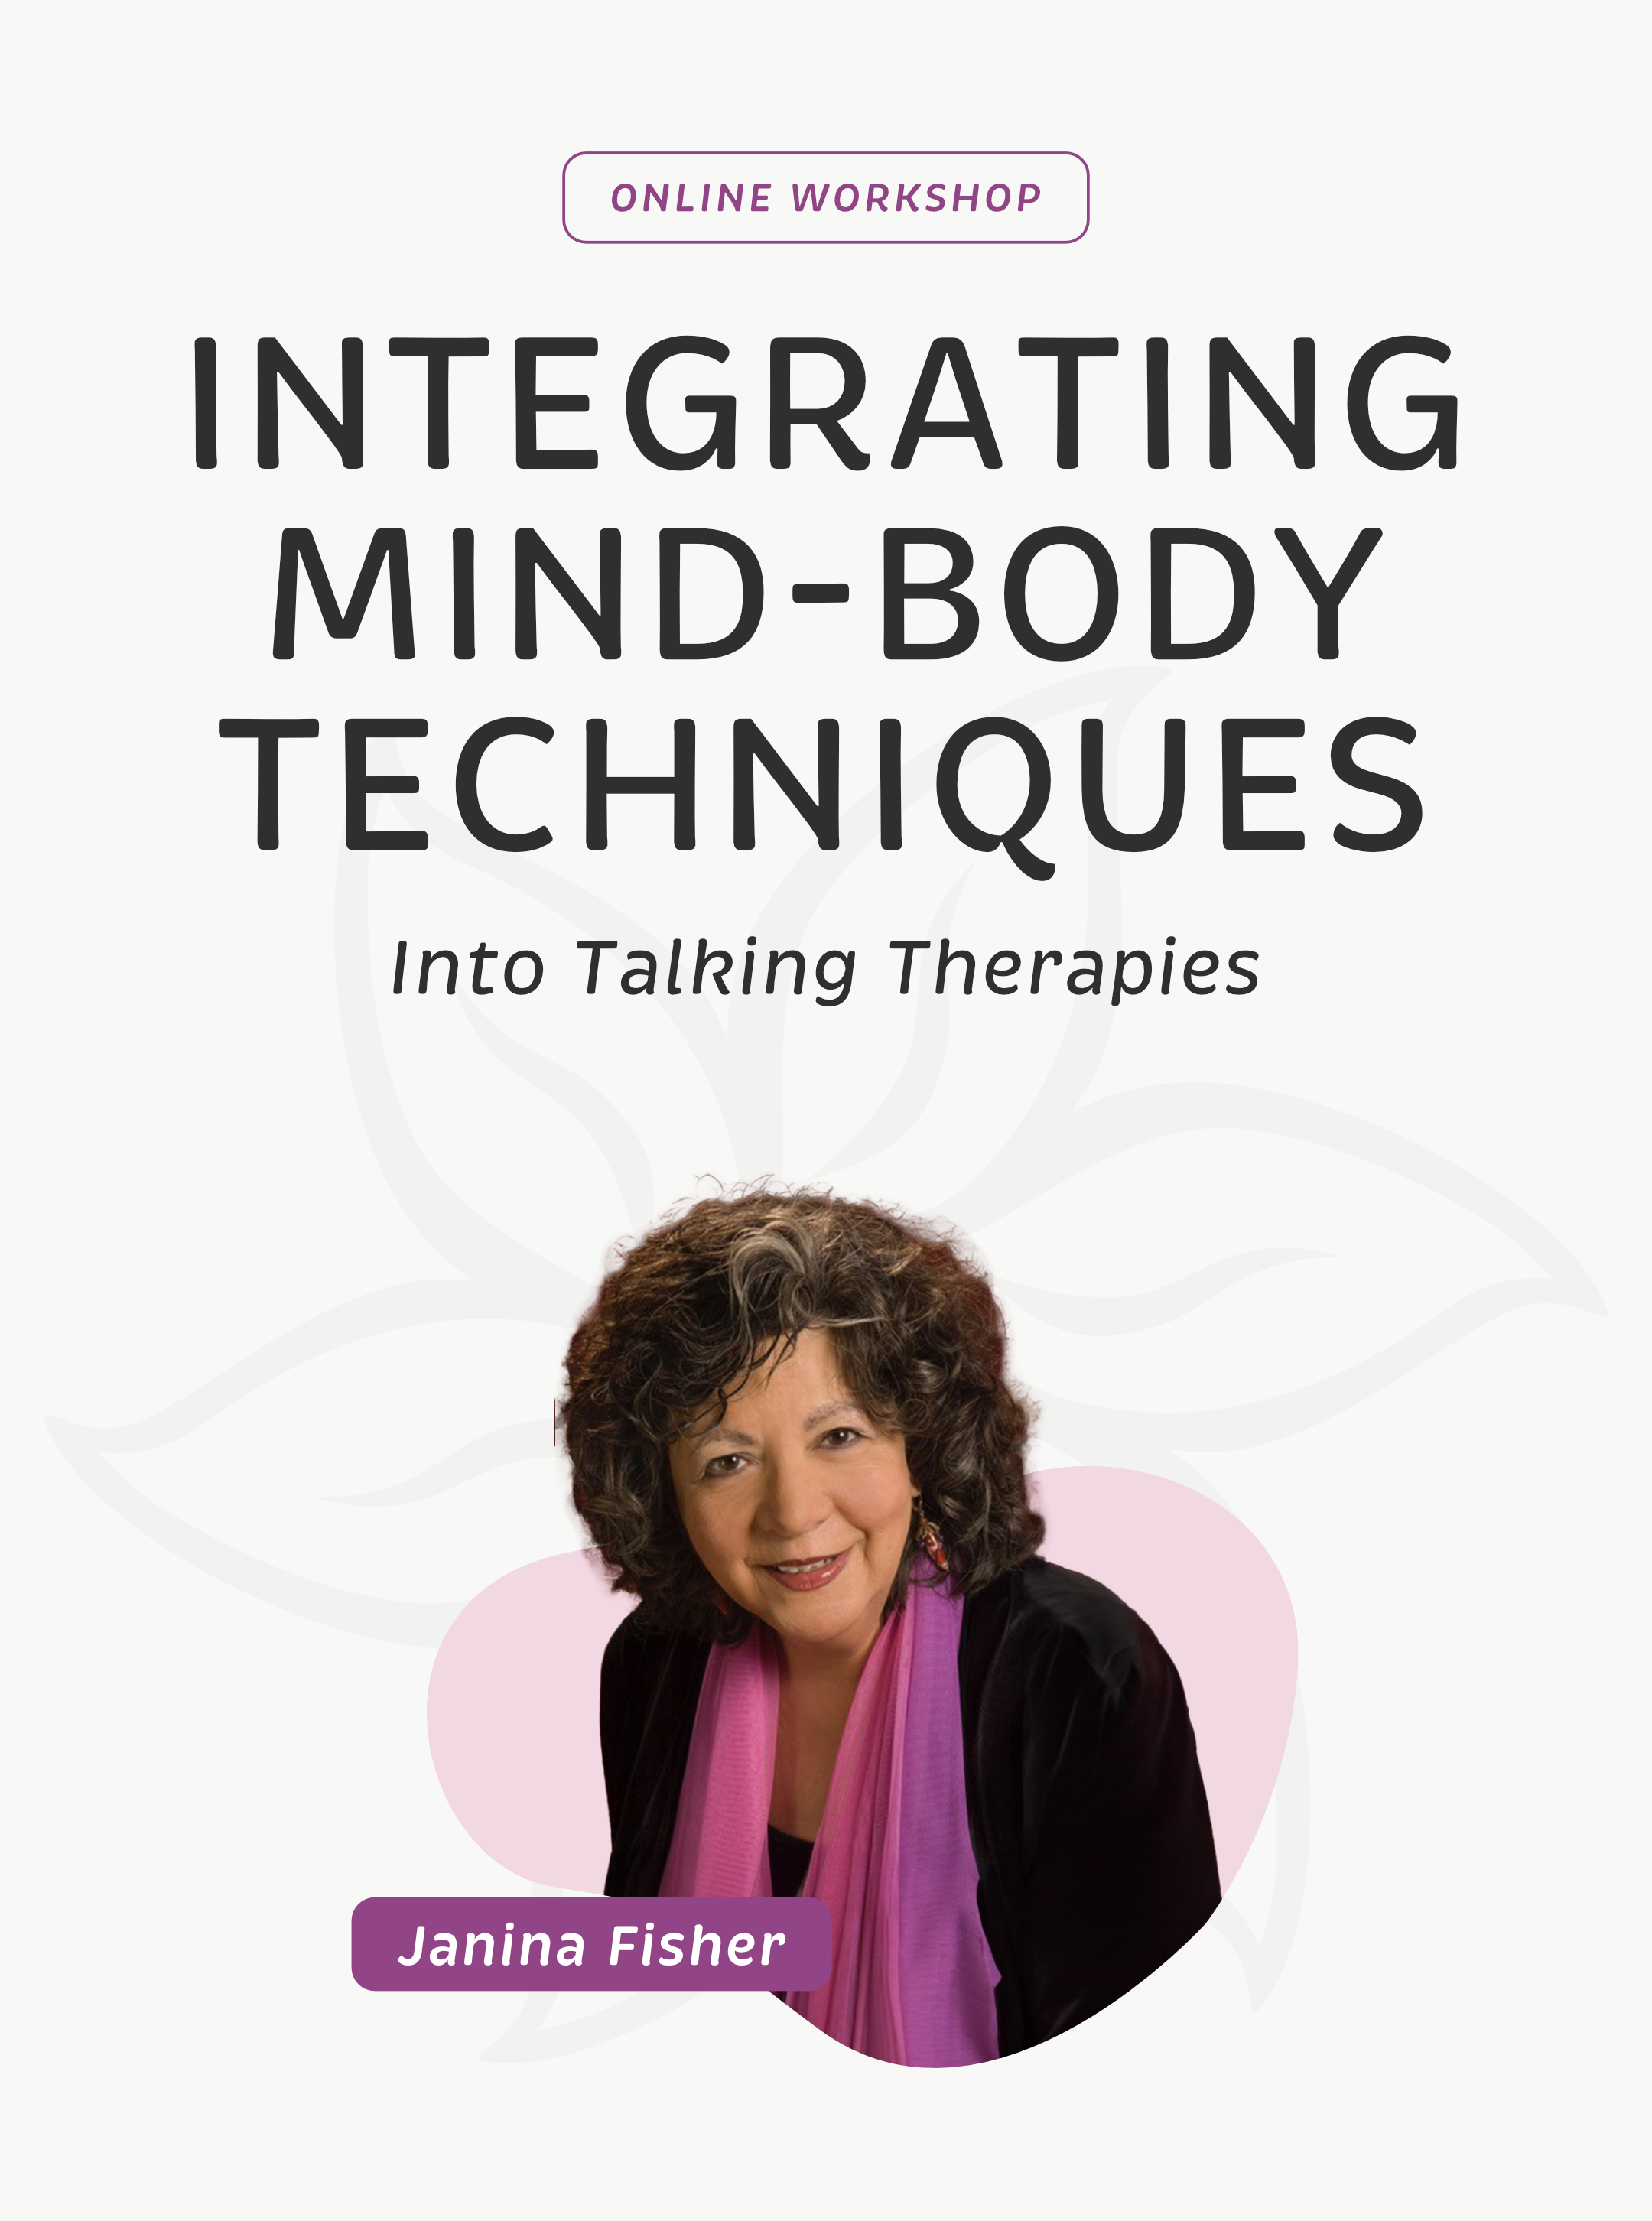 Kurs Integrating Mind-Body Techniques into Talking Therapies